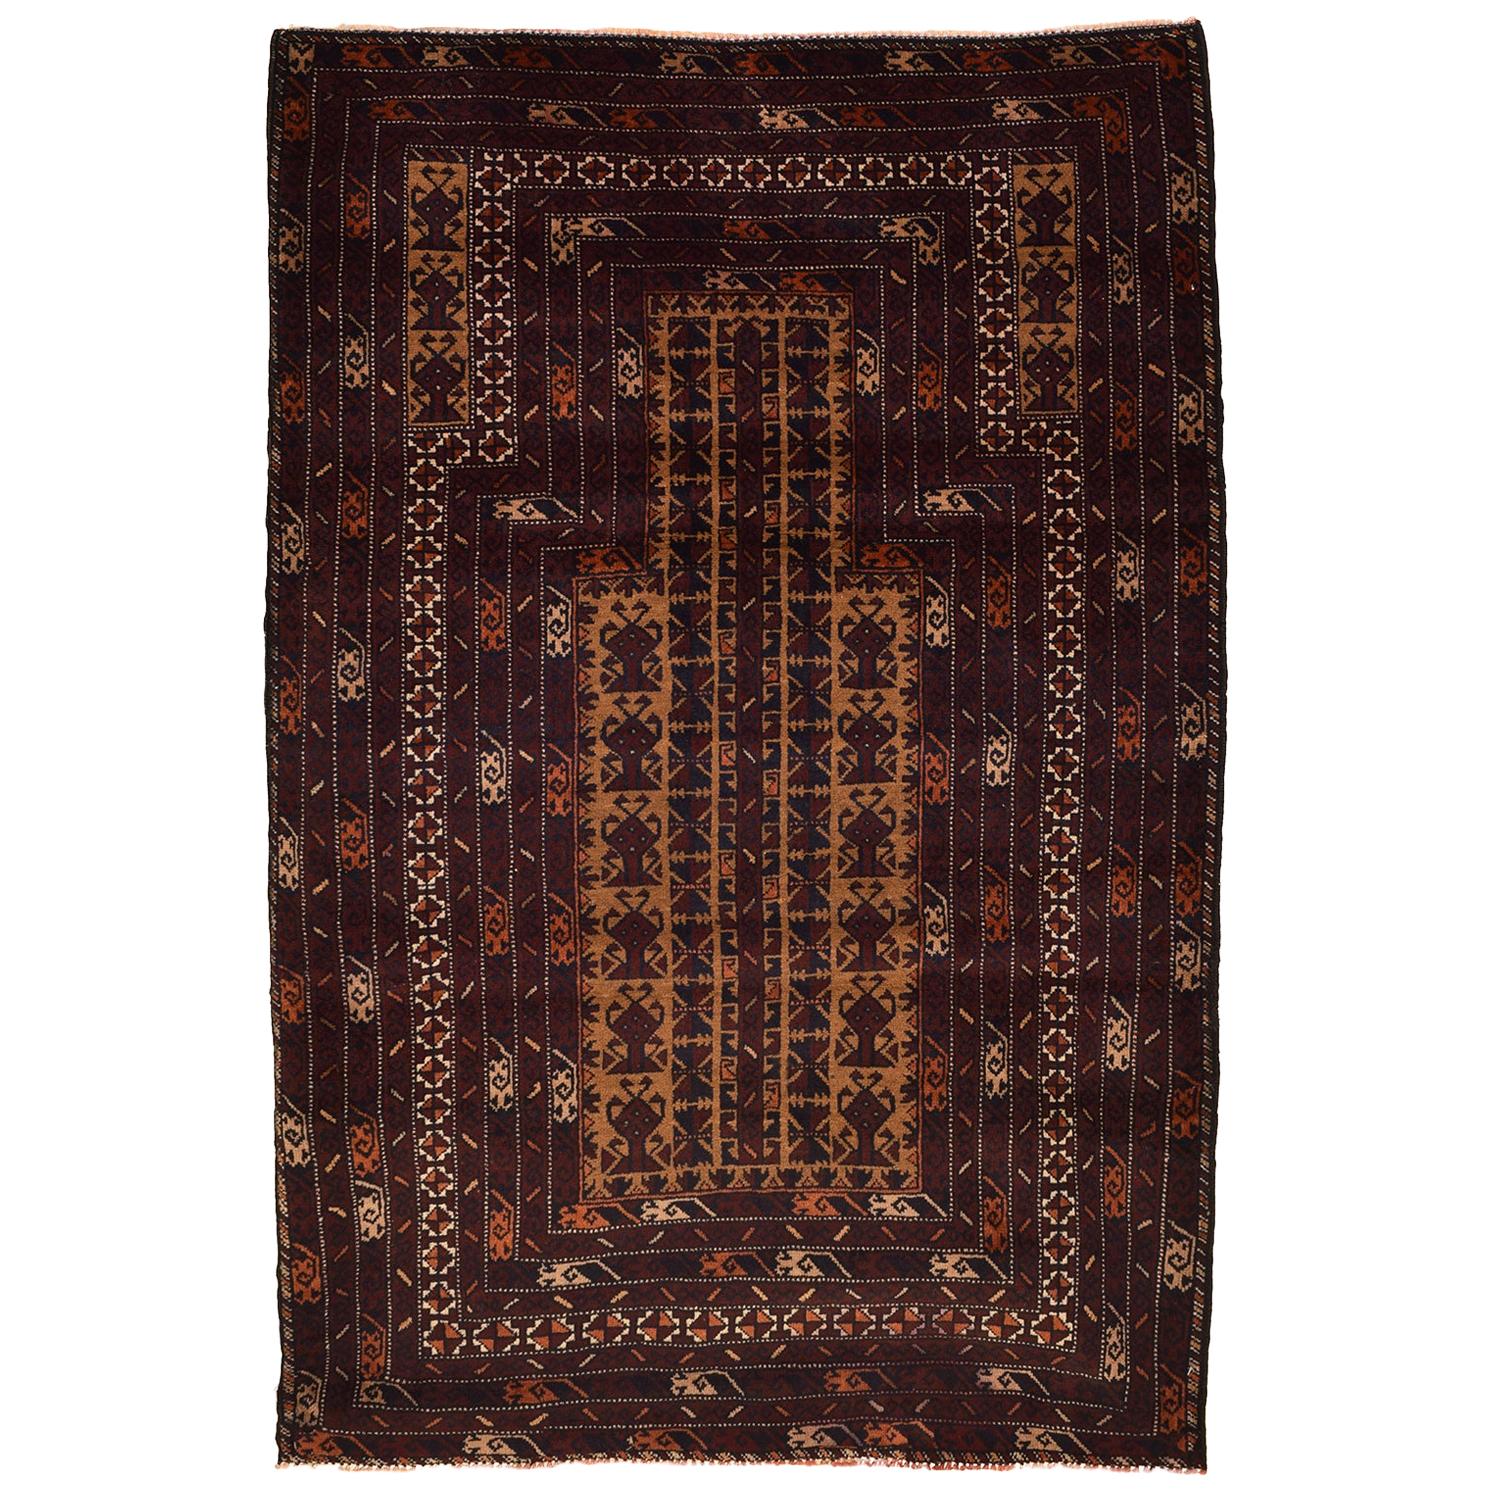 Traditional Persian Balouchi Carpet in Maroon, Orange, and Gold Wool